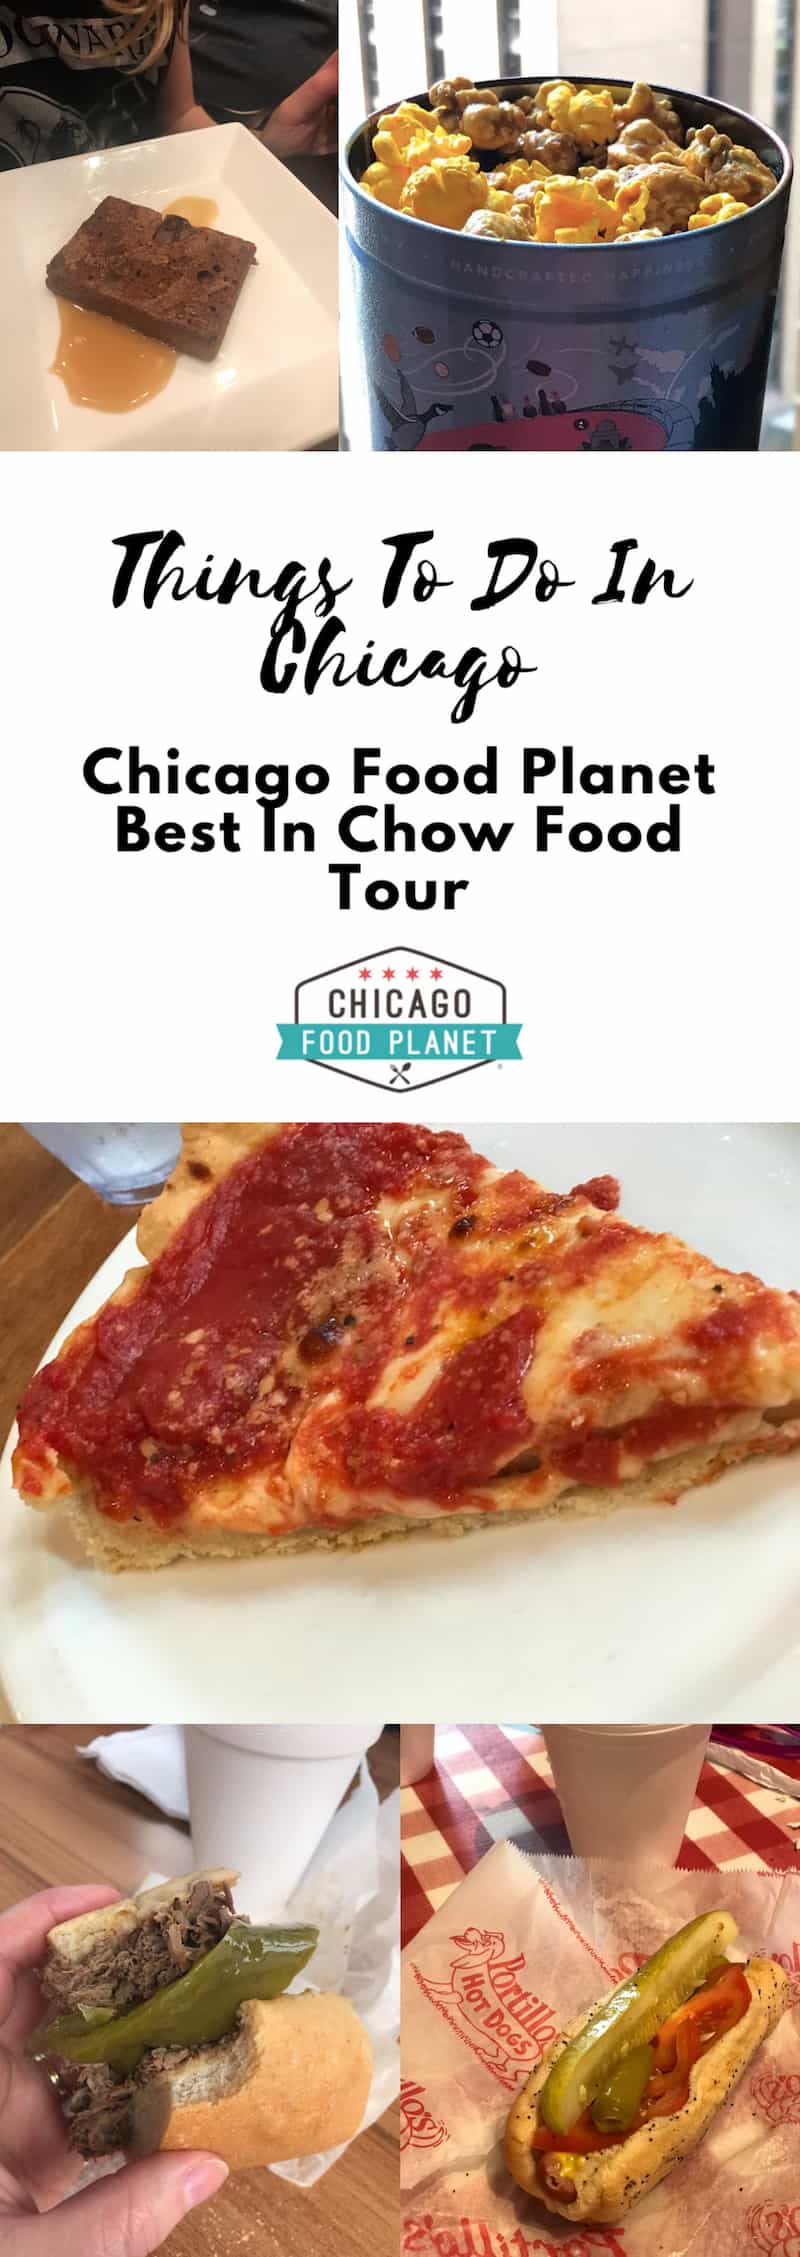 If you are planning a family vacation to Chicago. These are some of the best place to visit. Add this to your list of things to do when you travel to Chicago. So much good food at these restaurants! #Chicago #Food #ThingsToDo #vacation 